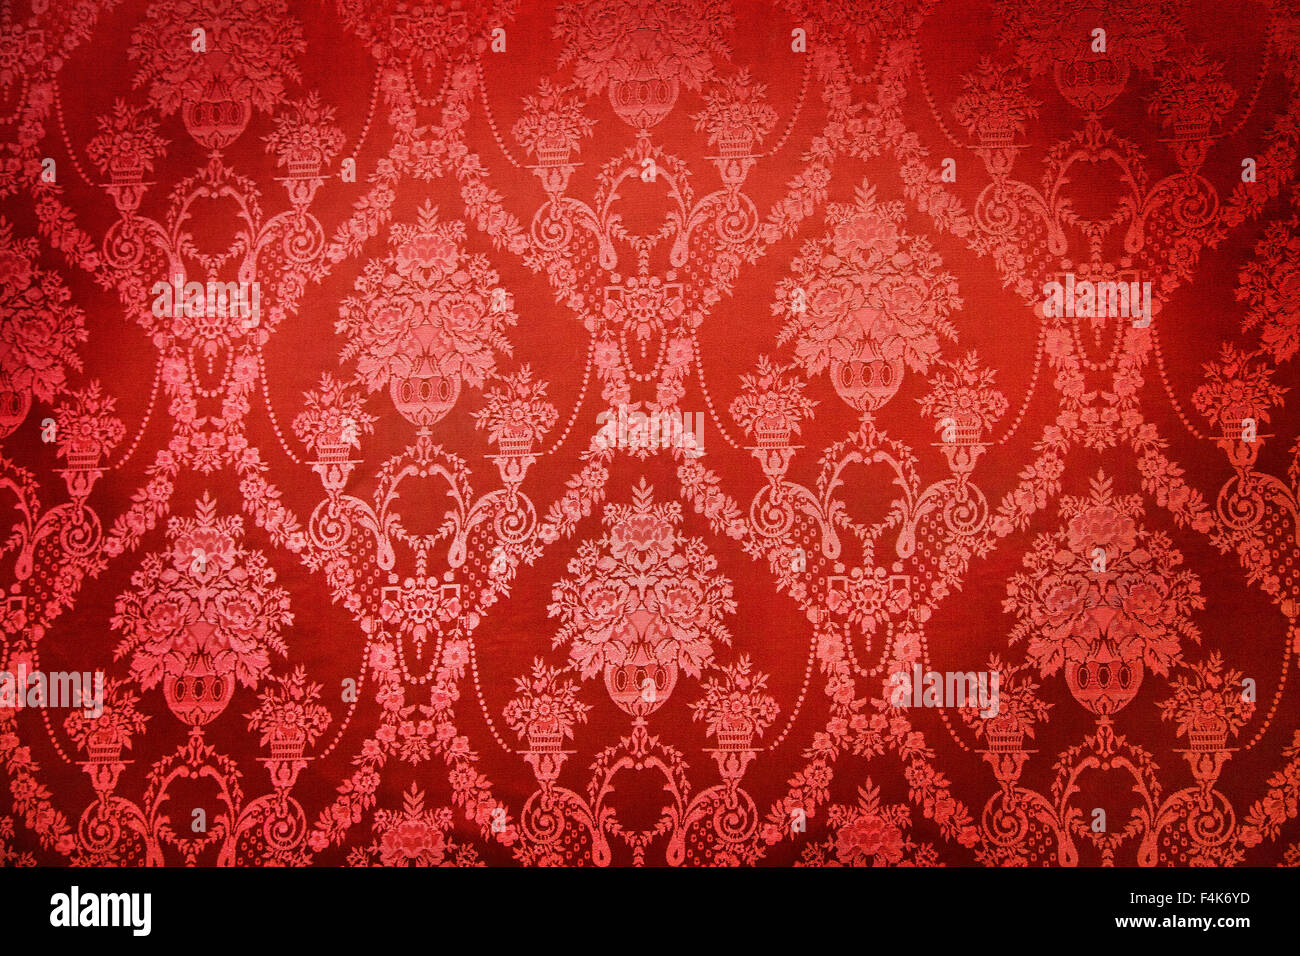 Old red textile wall covering in a palace Stock Photo